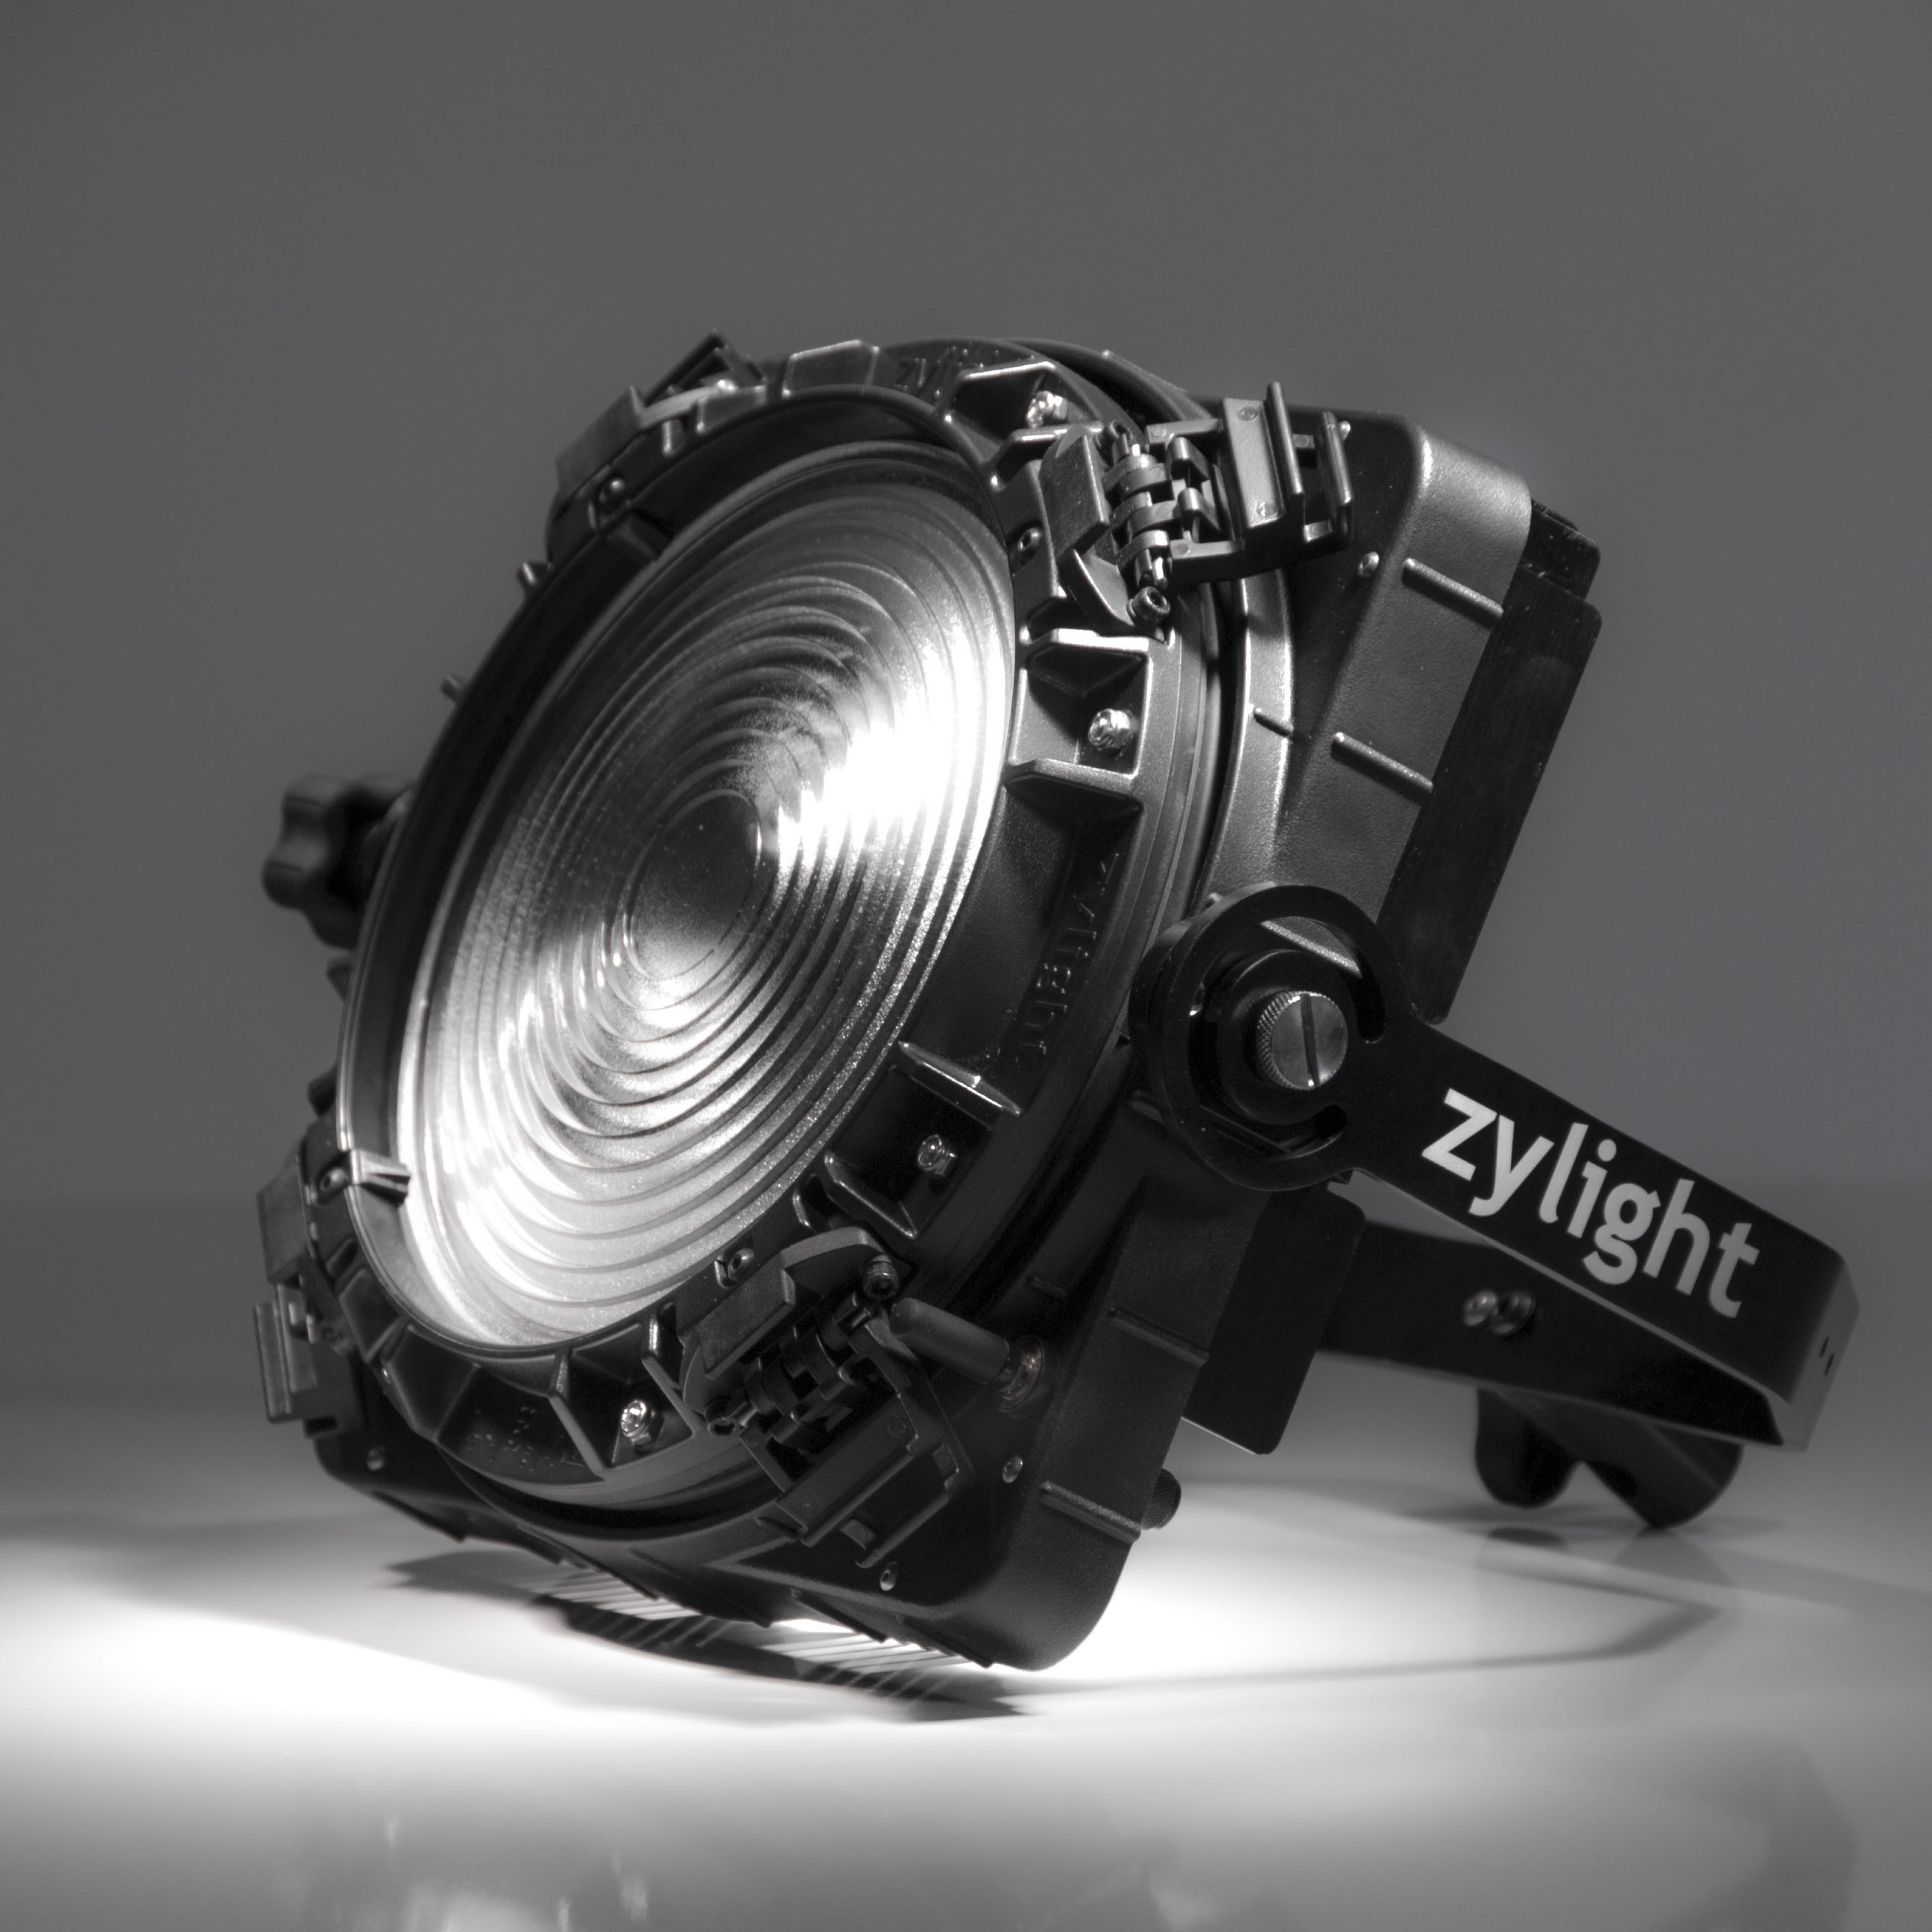 Zylight Demonstrates LED Lighting Options at CABSAT 2015 3